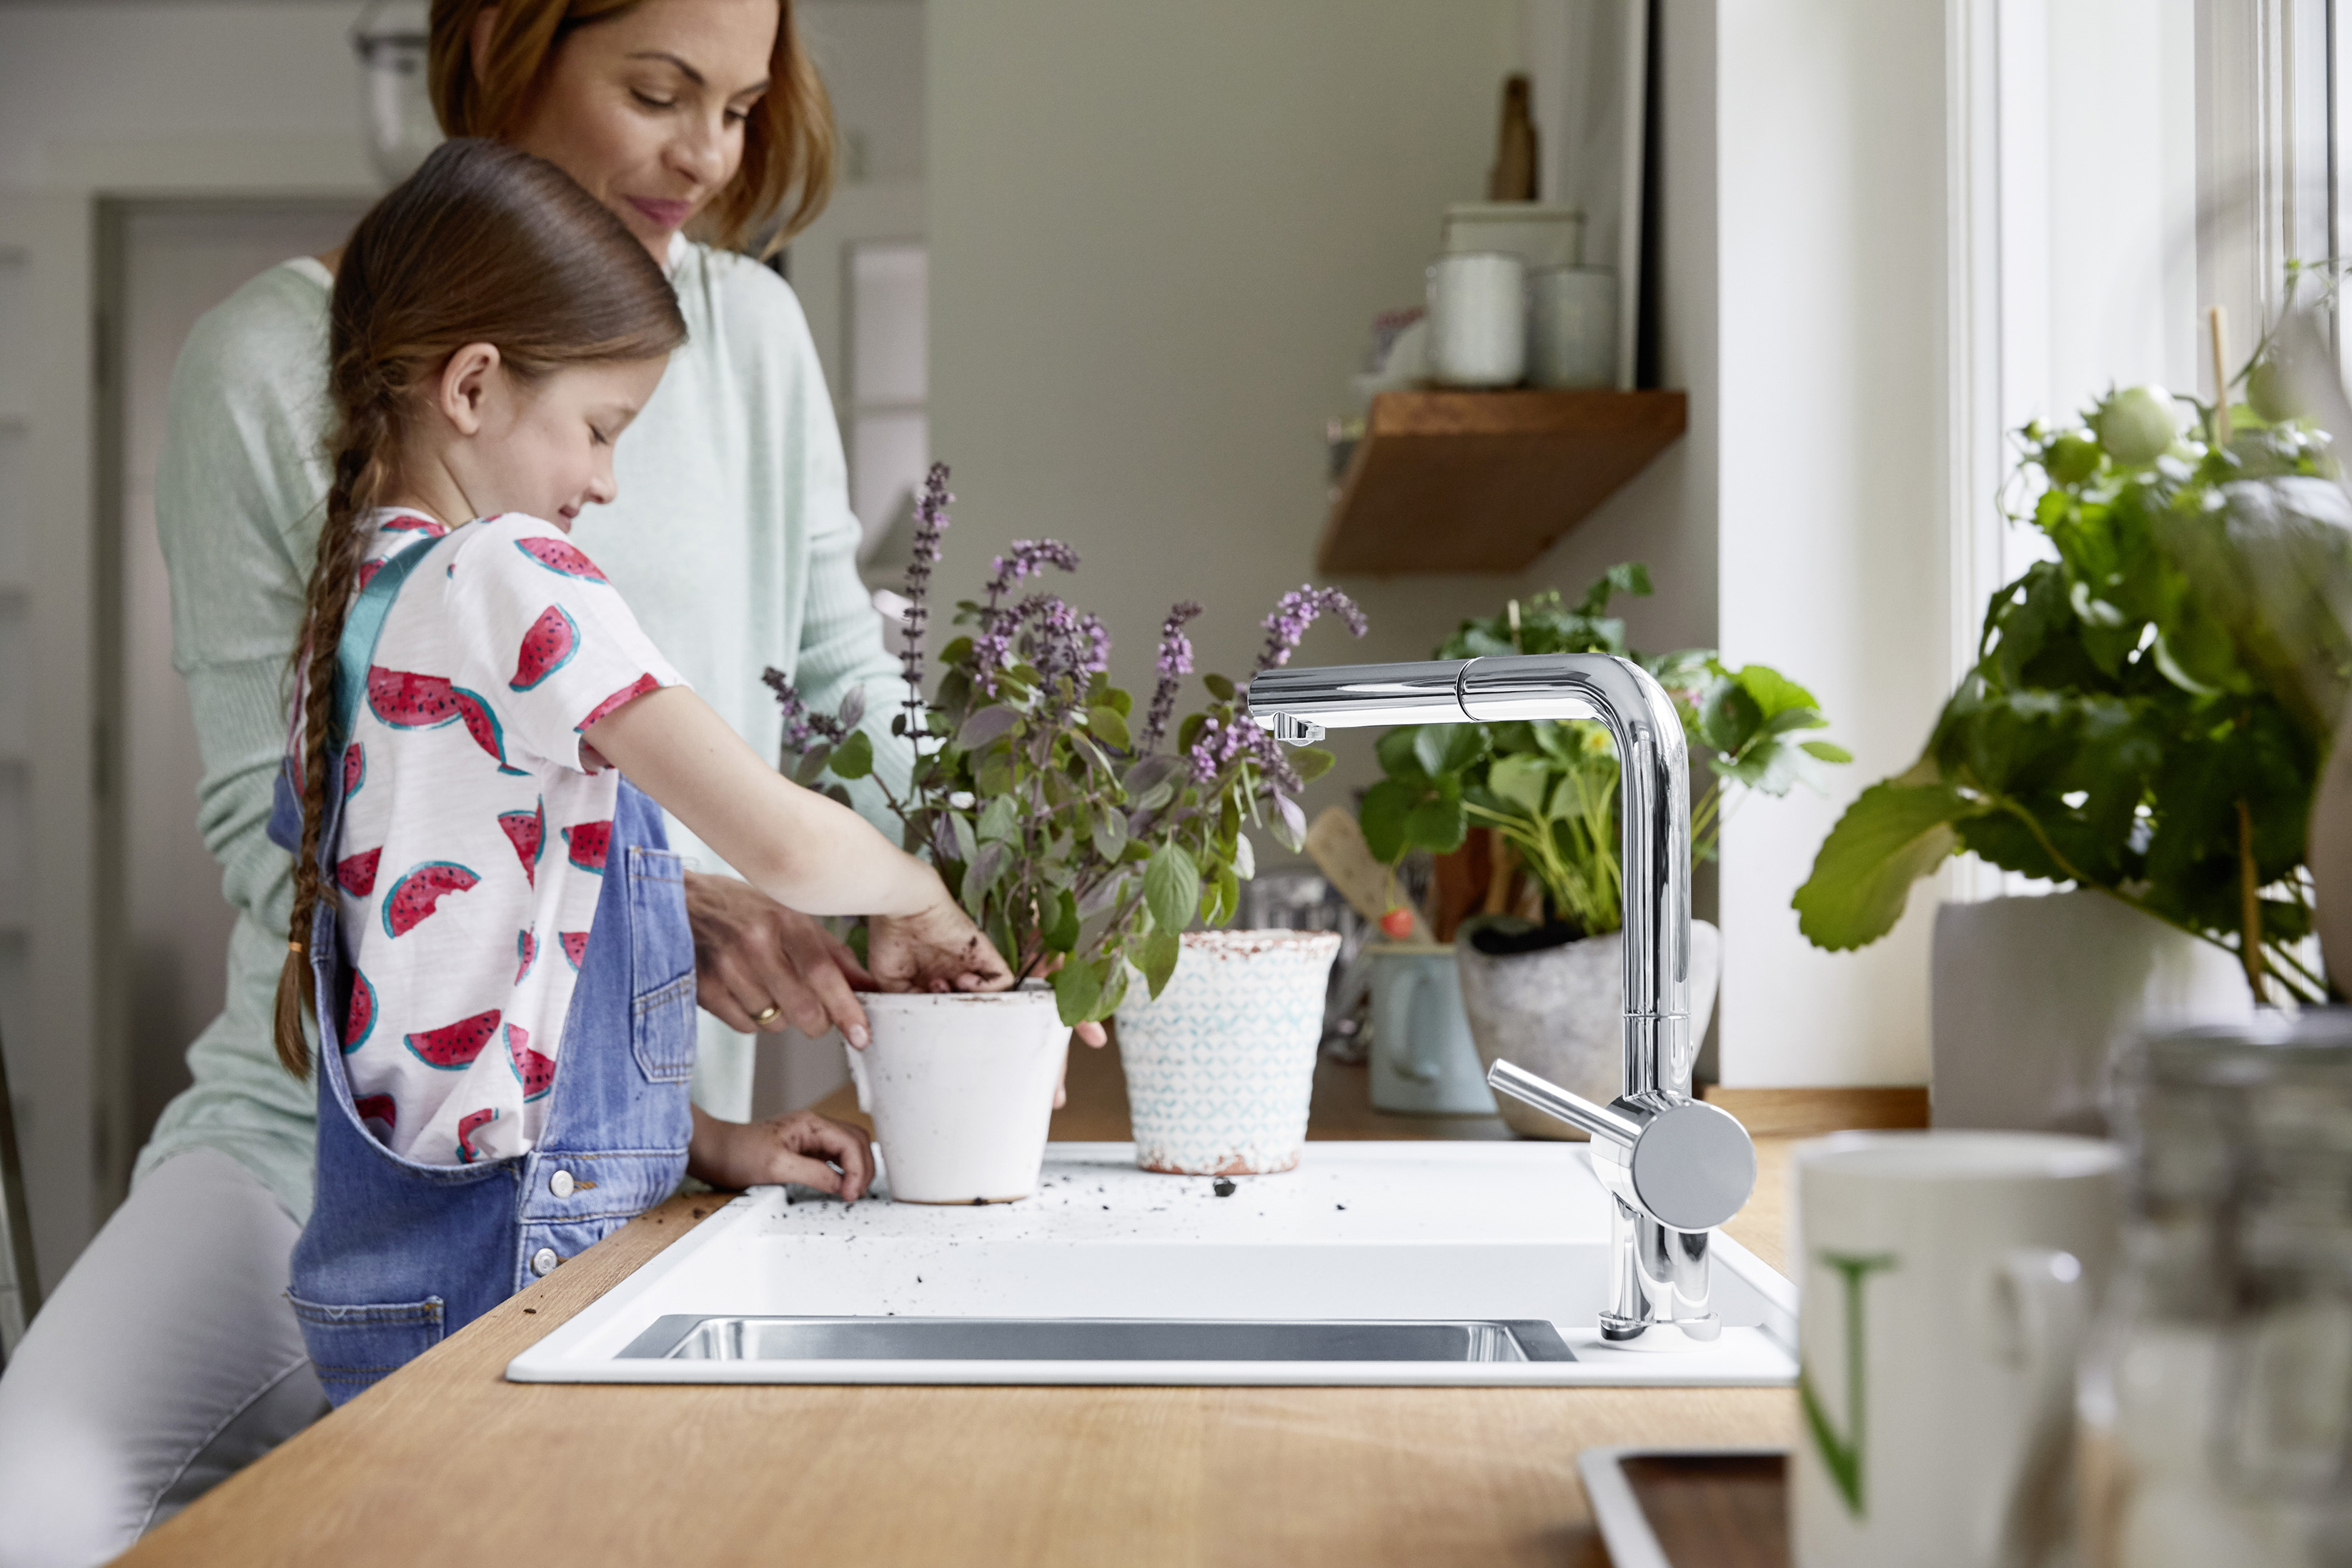 A child repotting a plant on a white Silgranit sink